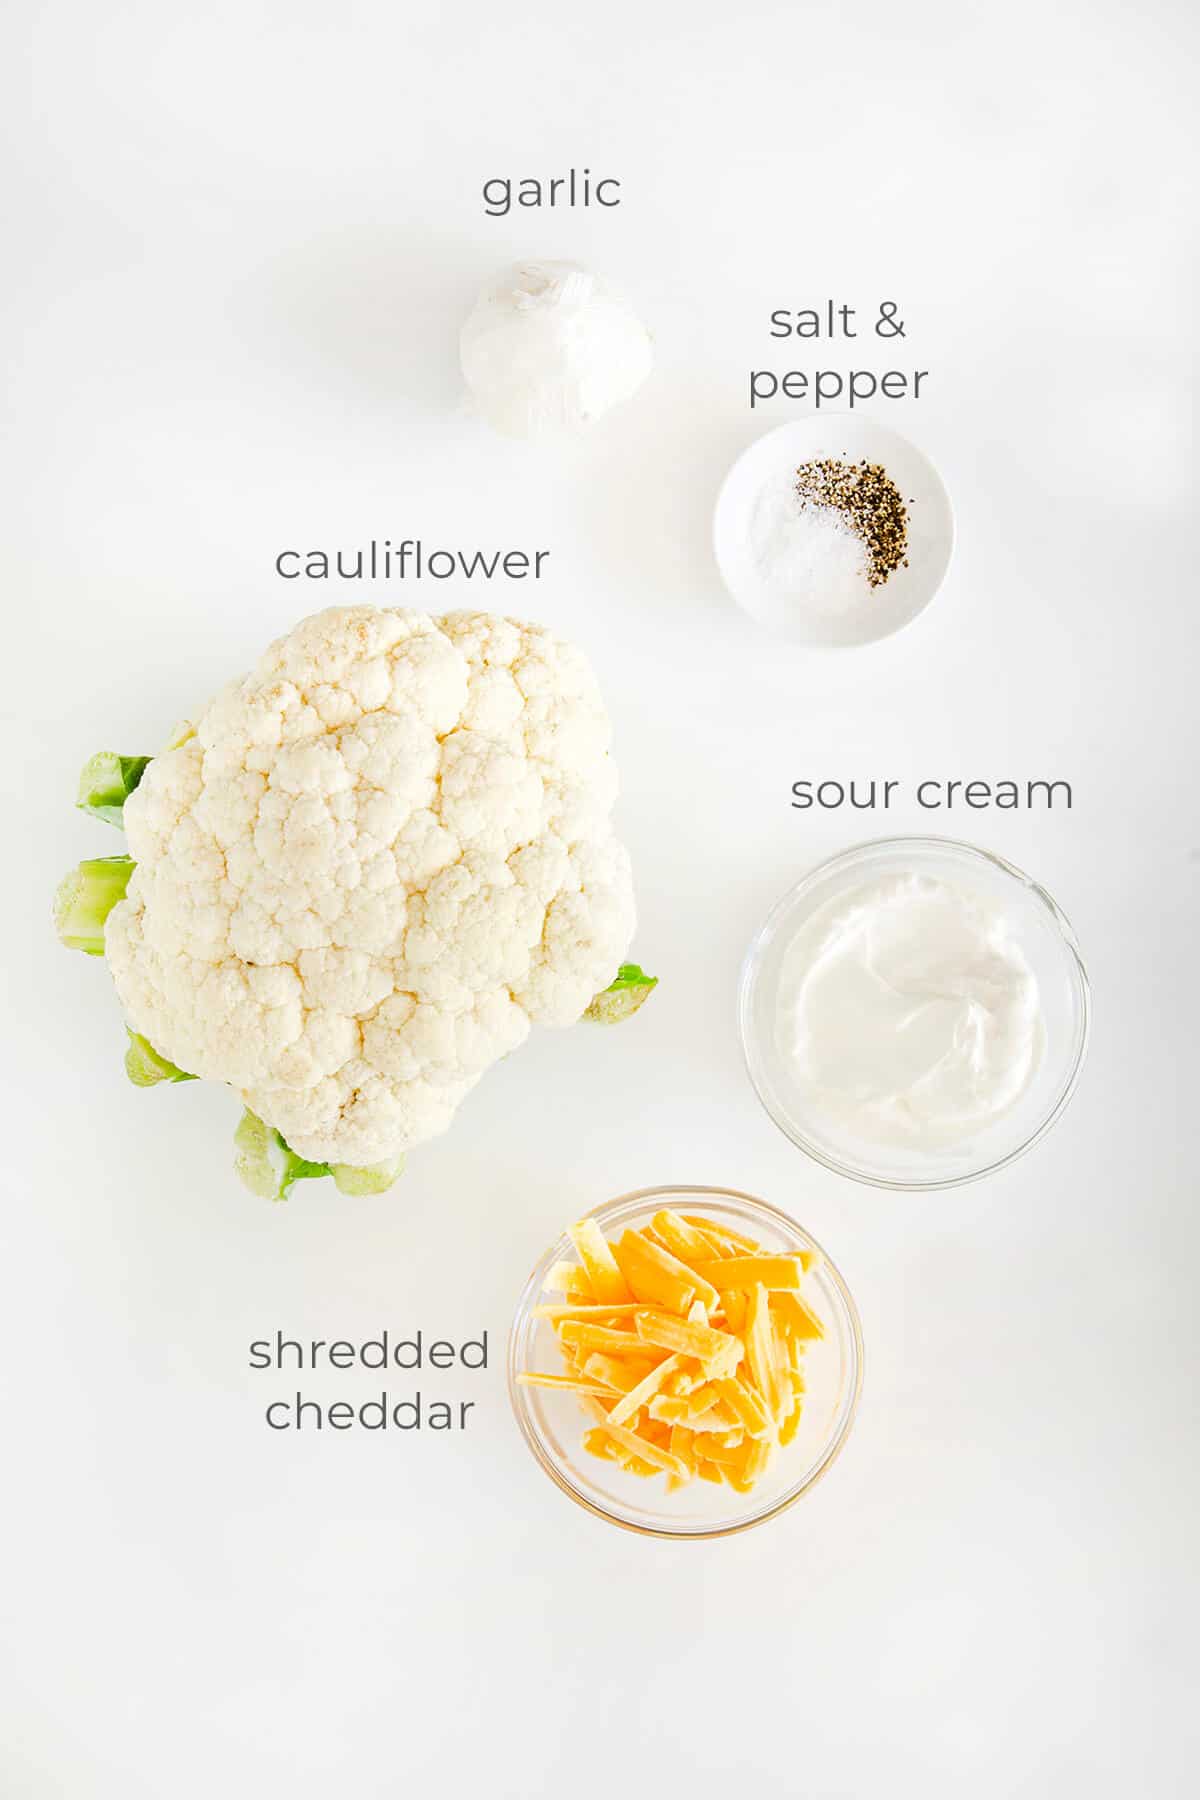 Ingredients labeled and needed to make cauliflower mash